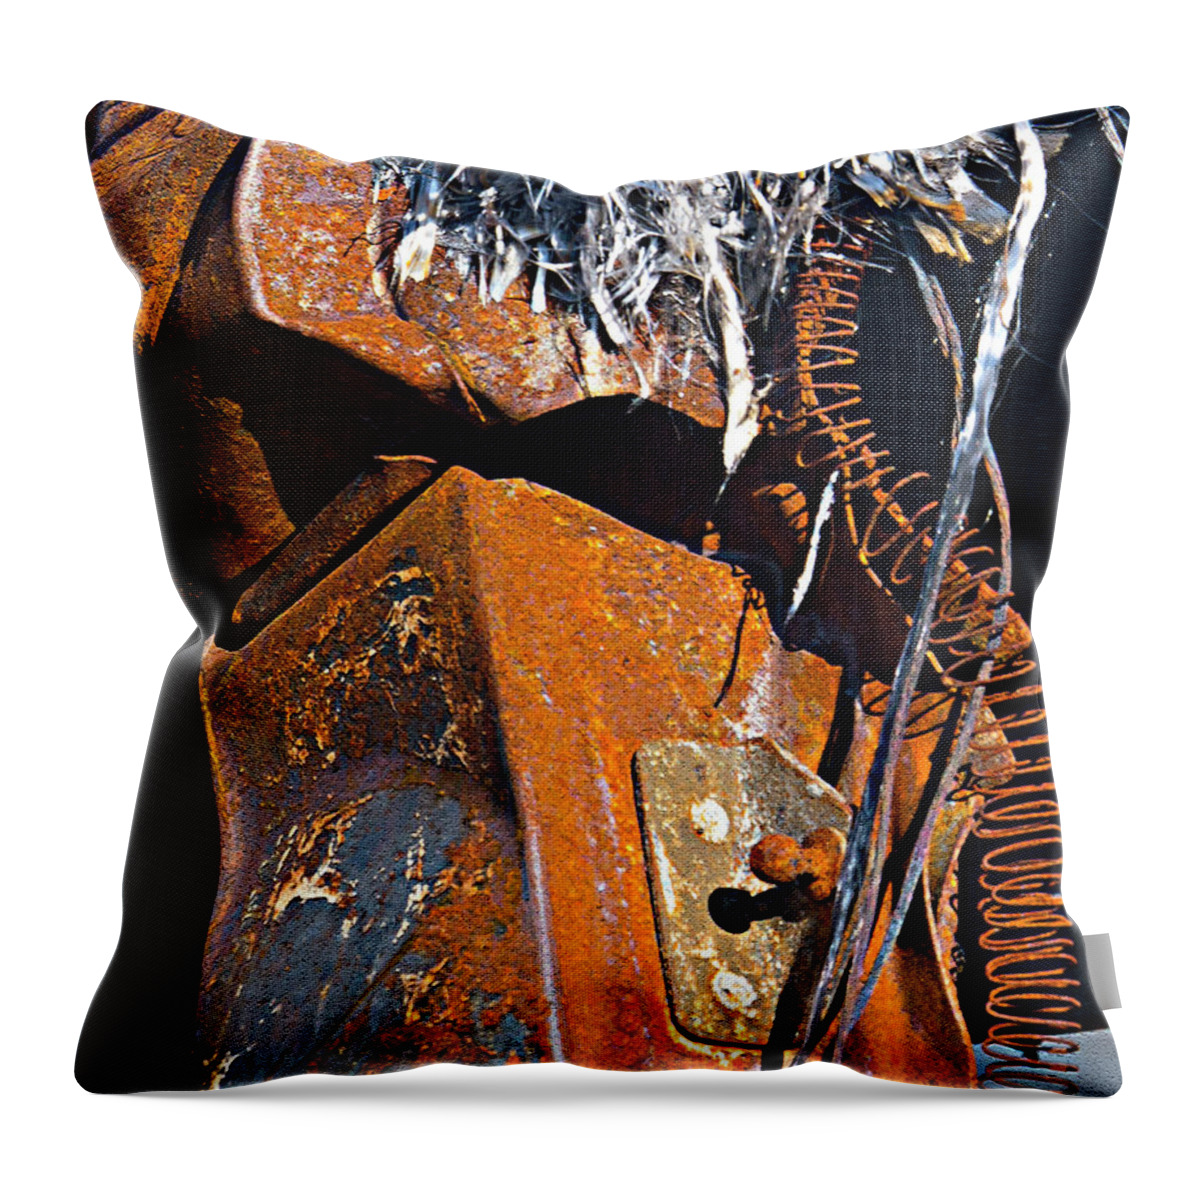 Rust Scapes #9 Throw Pillow featuring the photograph Rust Scapes #9 by Jessica Levant